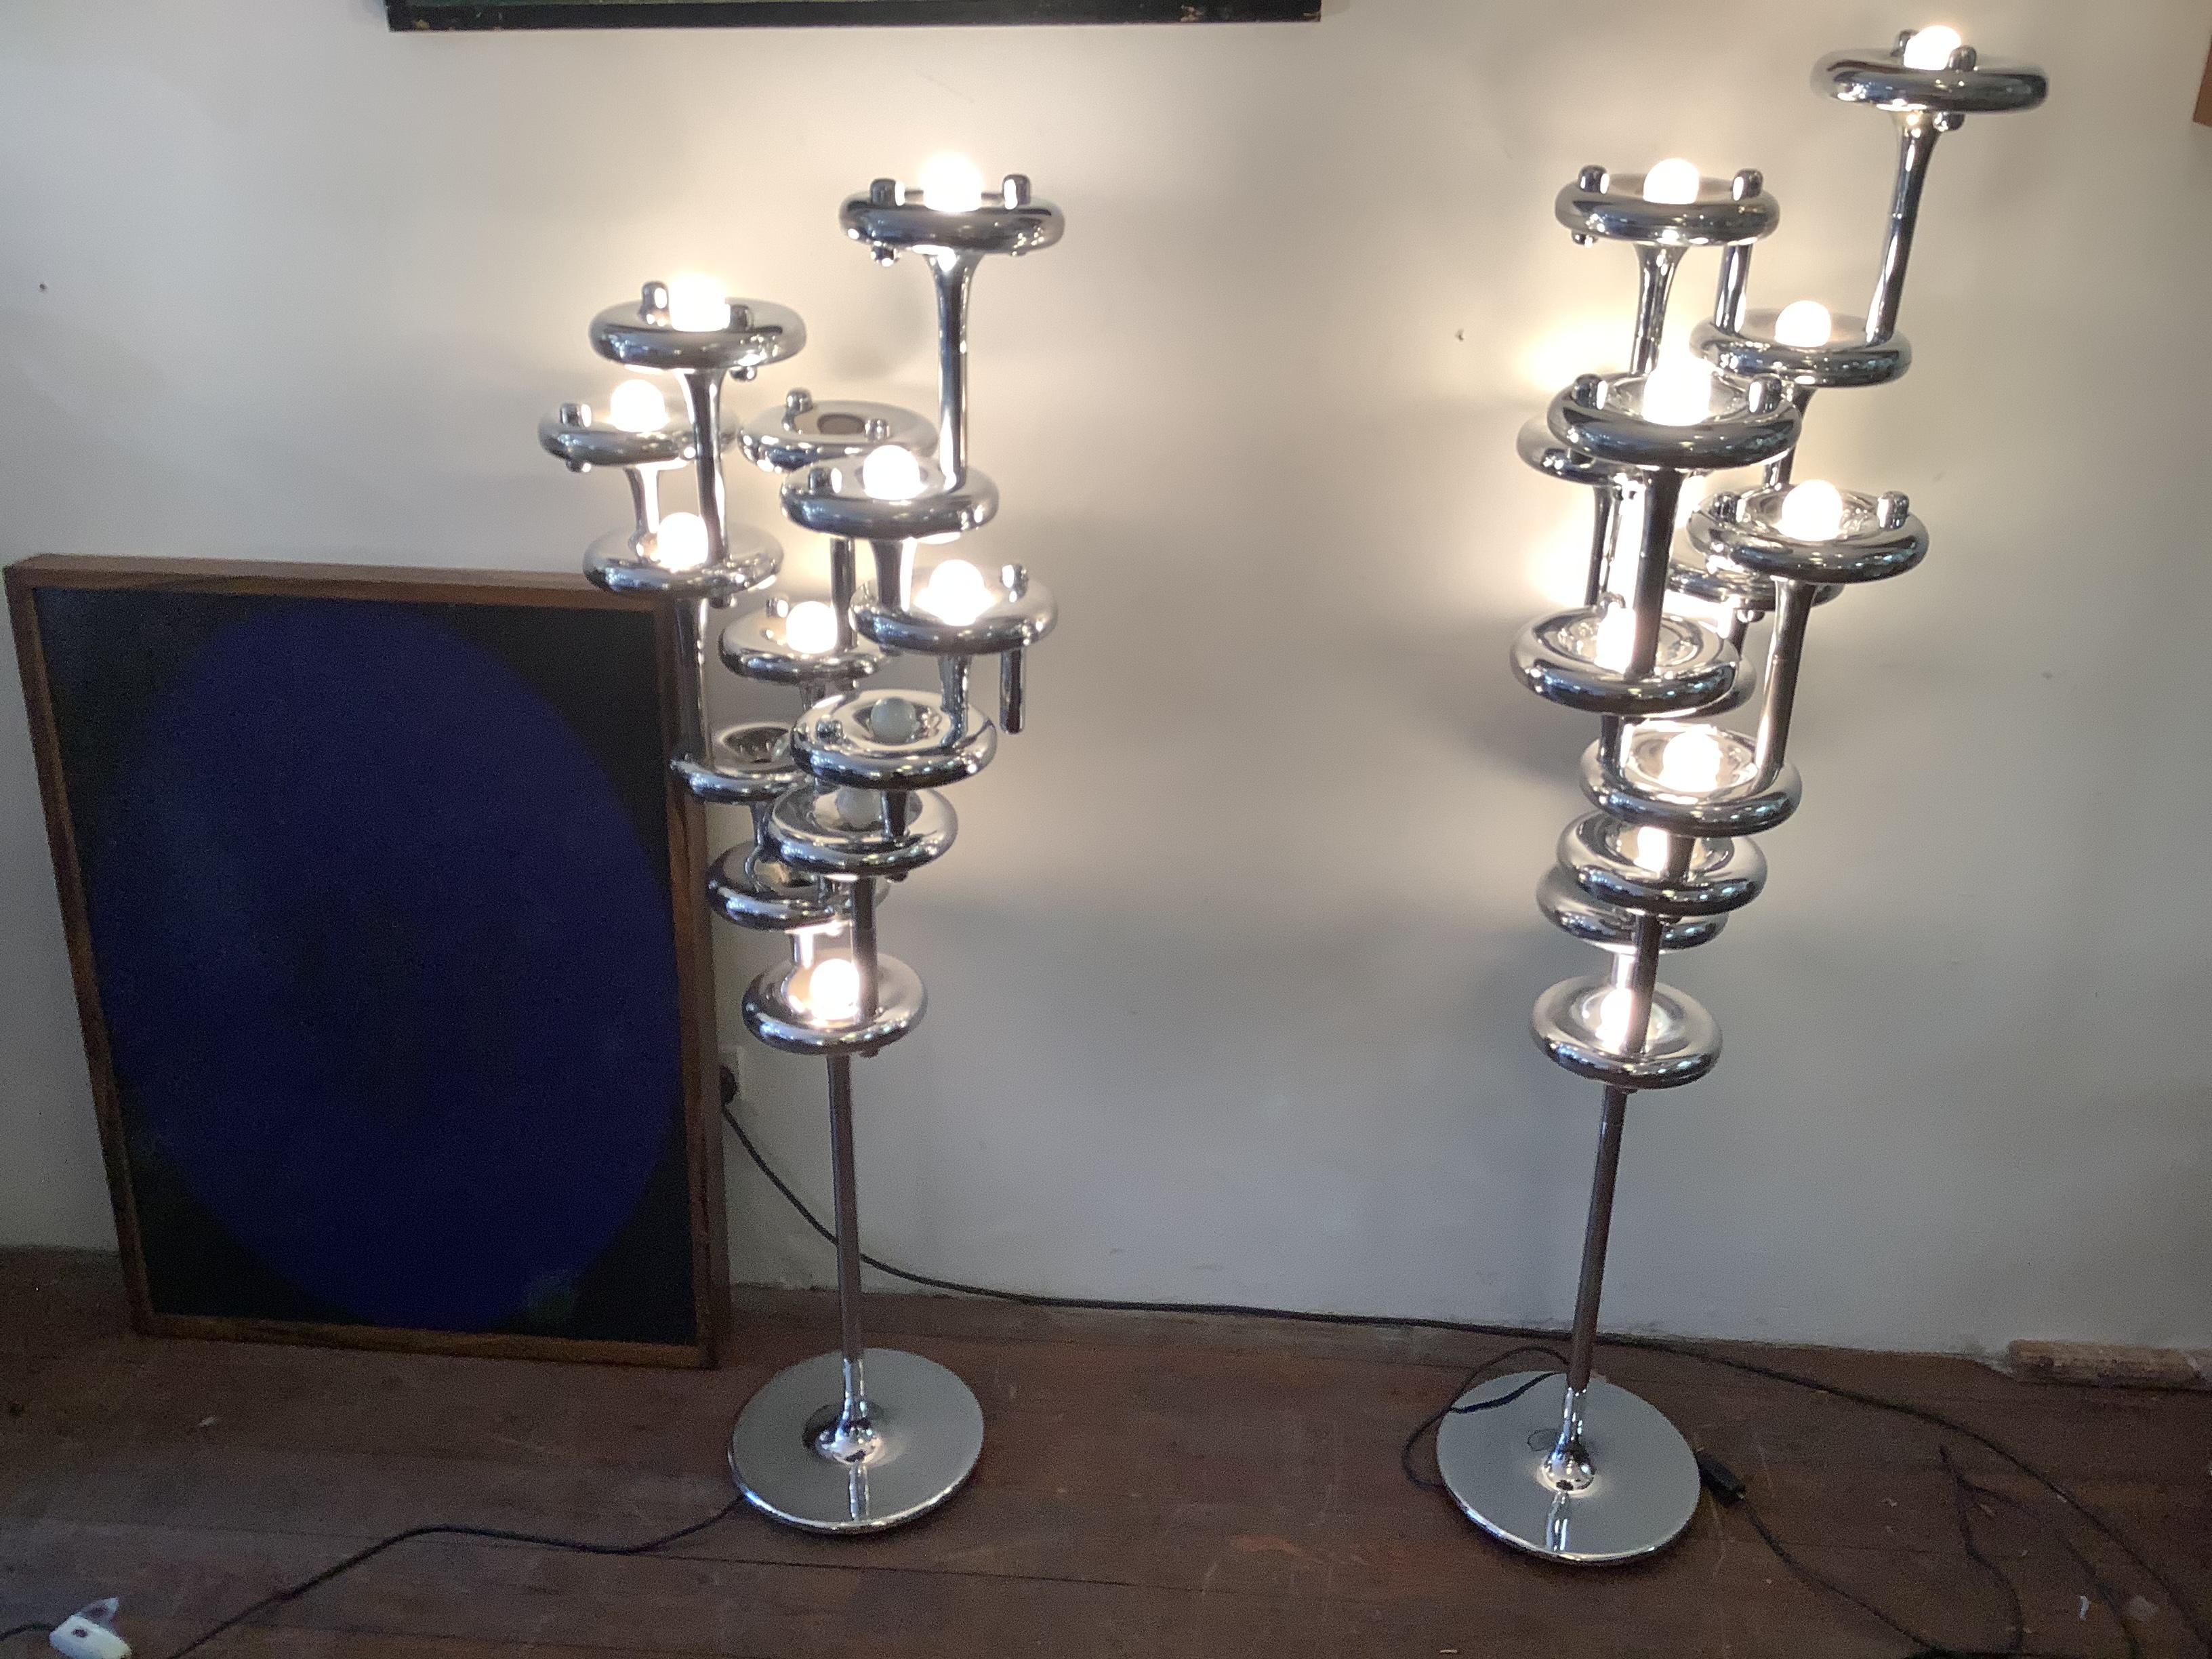 Fantastically rare modular pair of Space Age floor lamps.
Element lamp by Fritz Nagel, whose candlestick designs are very famous. This lamp consists of 12 light elements . The elements can be arranged in different ways by screwing them together.